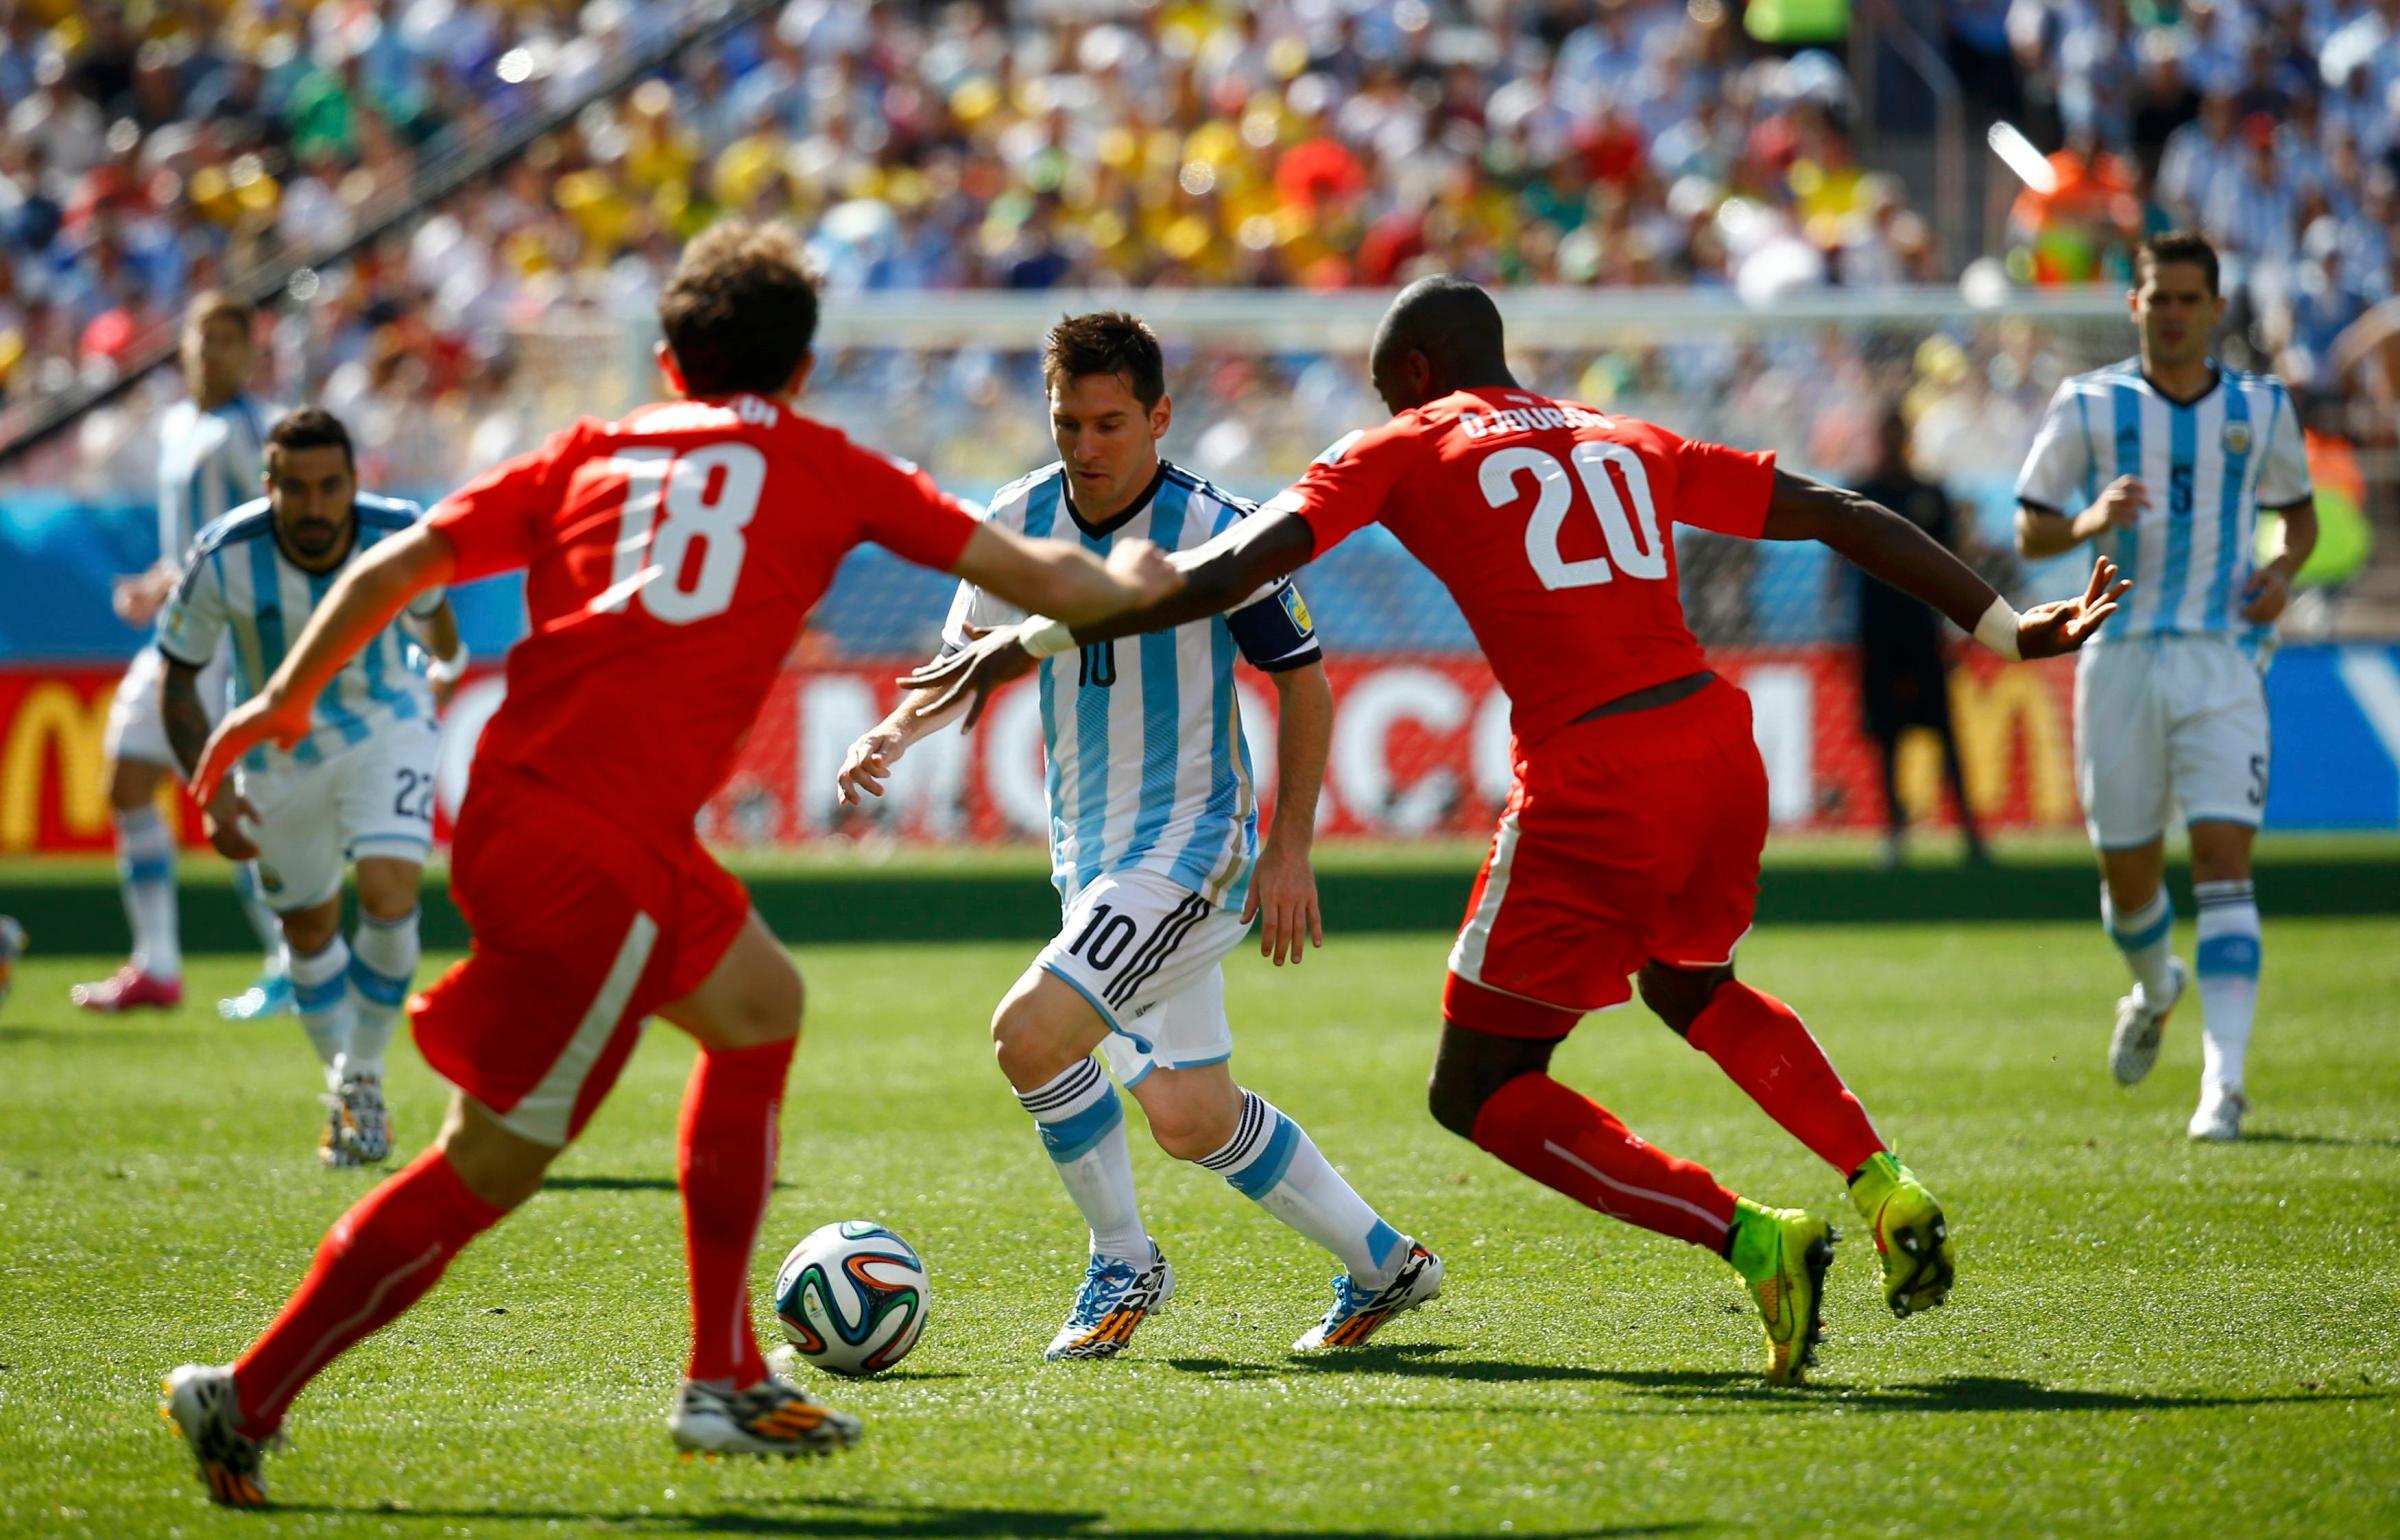 Argentina's Messi fights for the ball with Switzerland's Mehmedi and Djourou during their 2014 World Cup round of 16 game at the Corinthians arena in Sao Paulo